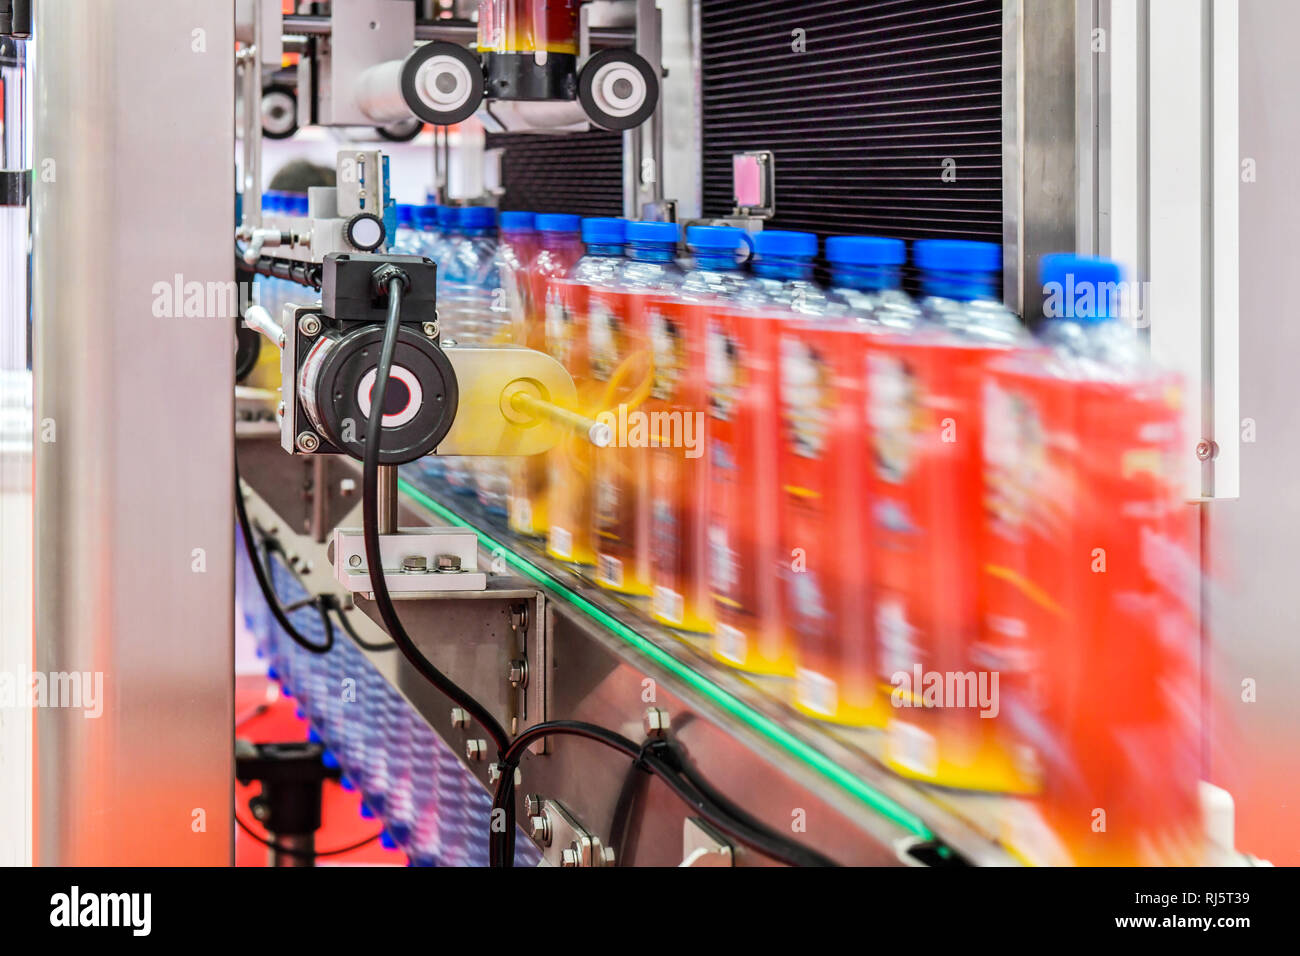 Clear Bottles transfer on Automated conveyor systems industrial automation for package Stock Photo